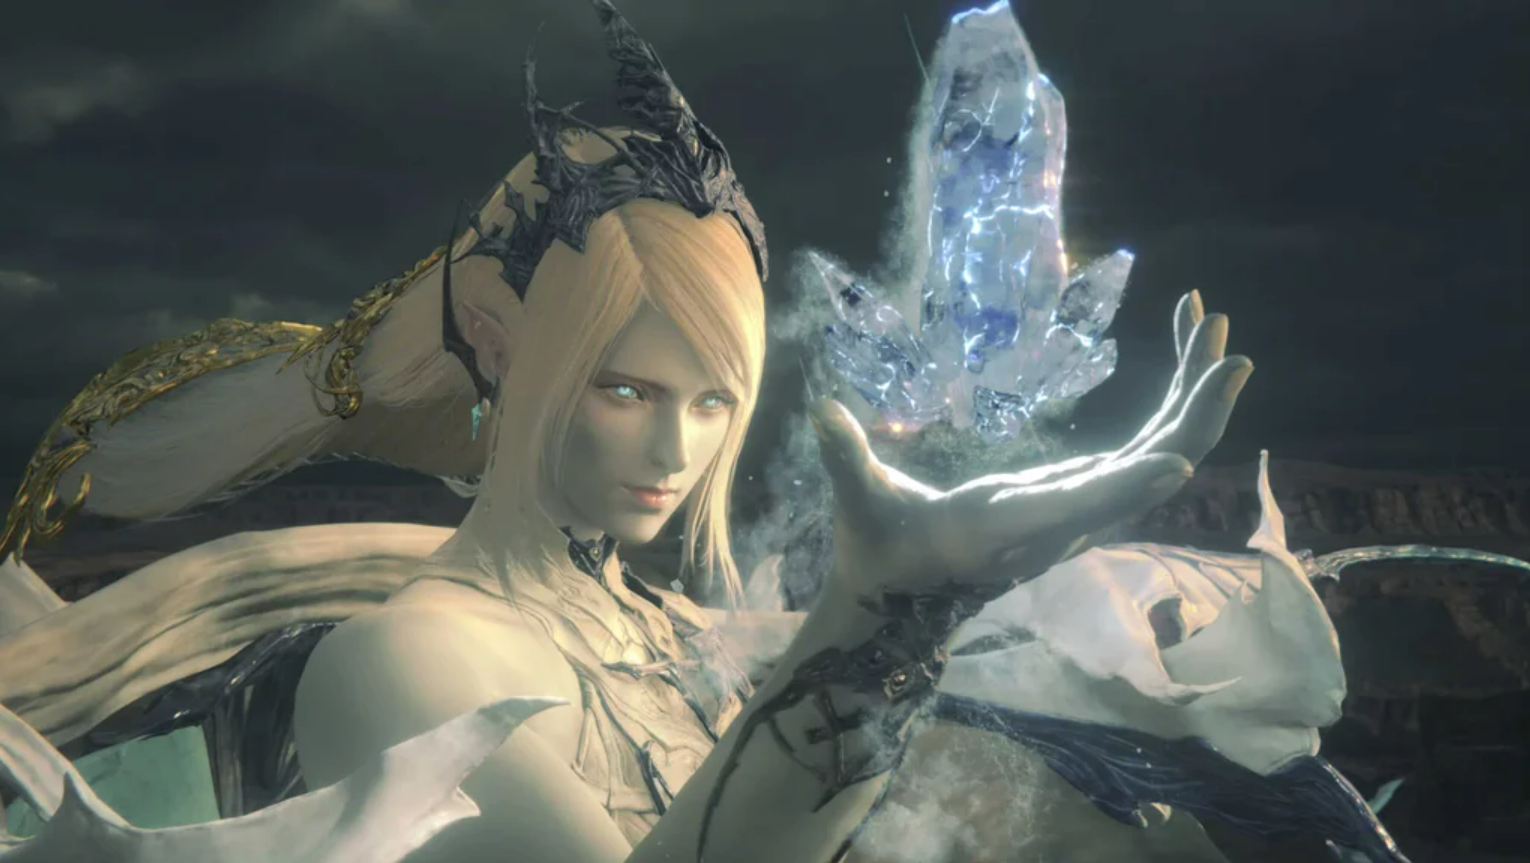 Final Fantasy video game set in medieval Europe scorched for 'overwhelming Whiteness'